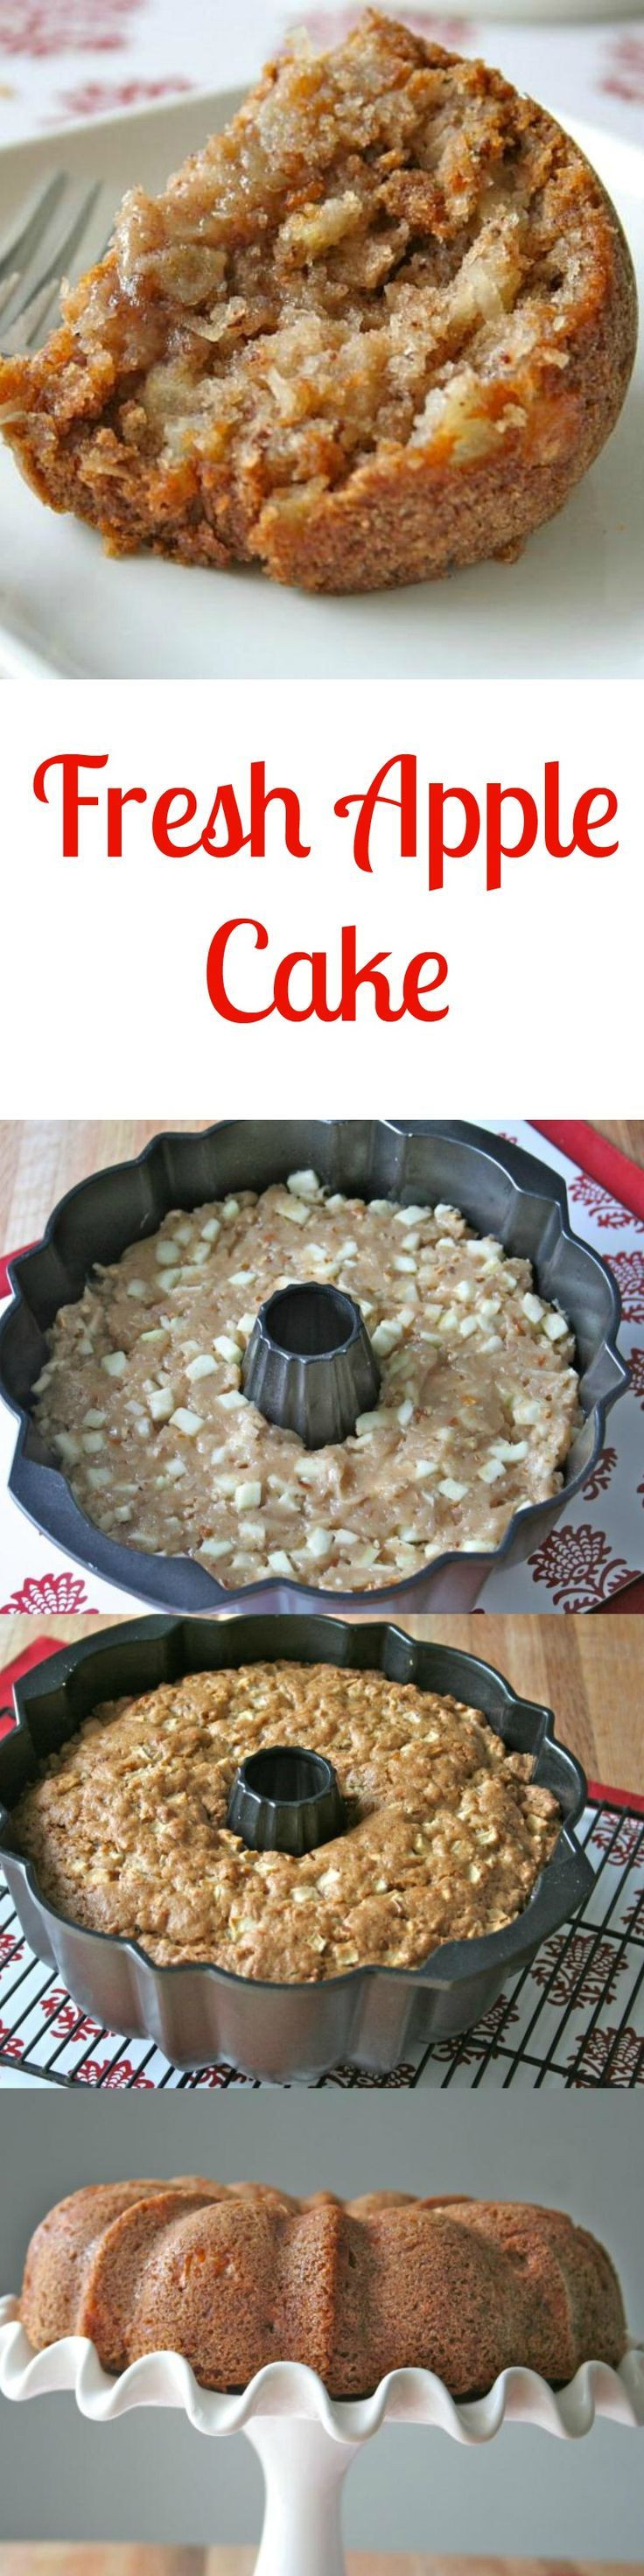 Apple Recipes For Fall
 25 best ideas about Autumn cake on Pinterest